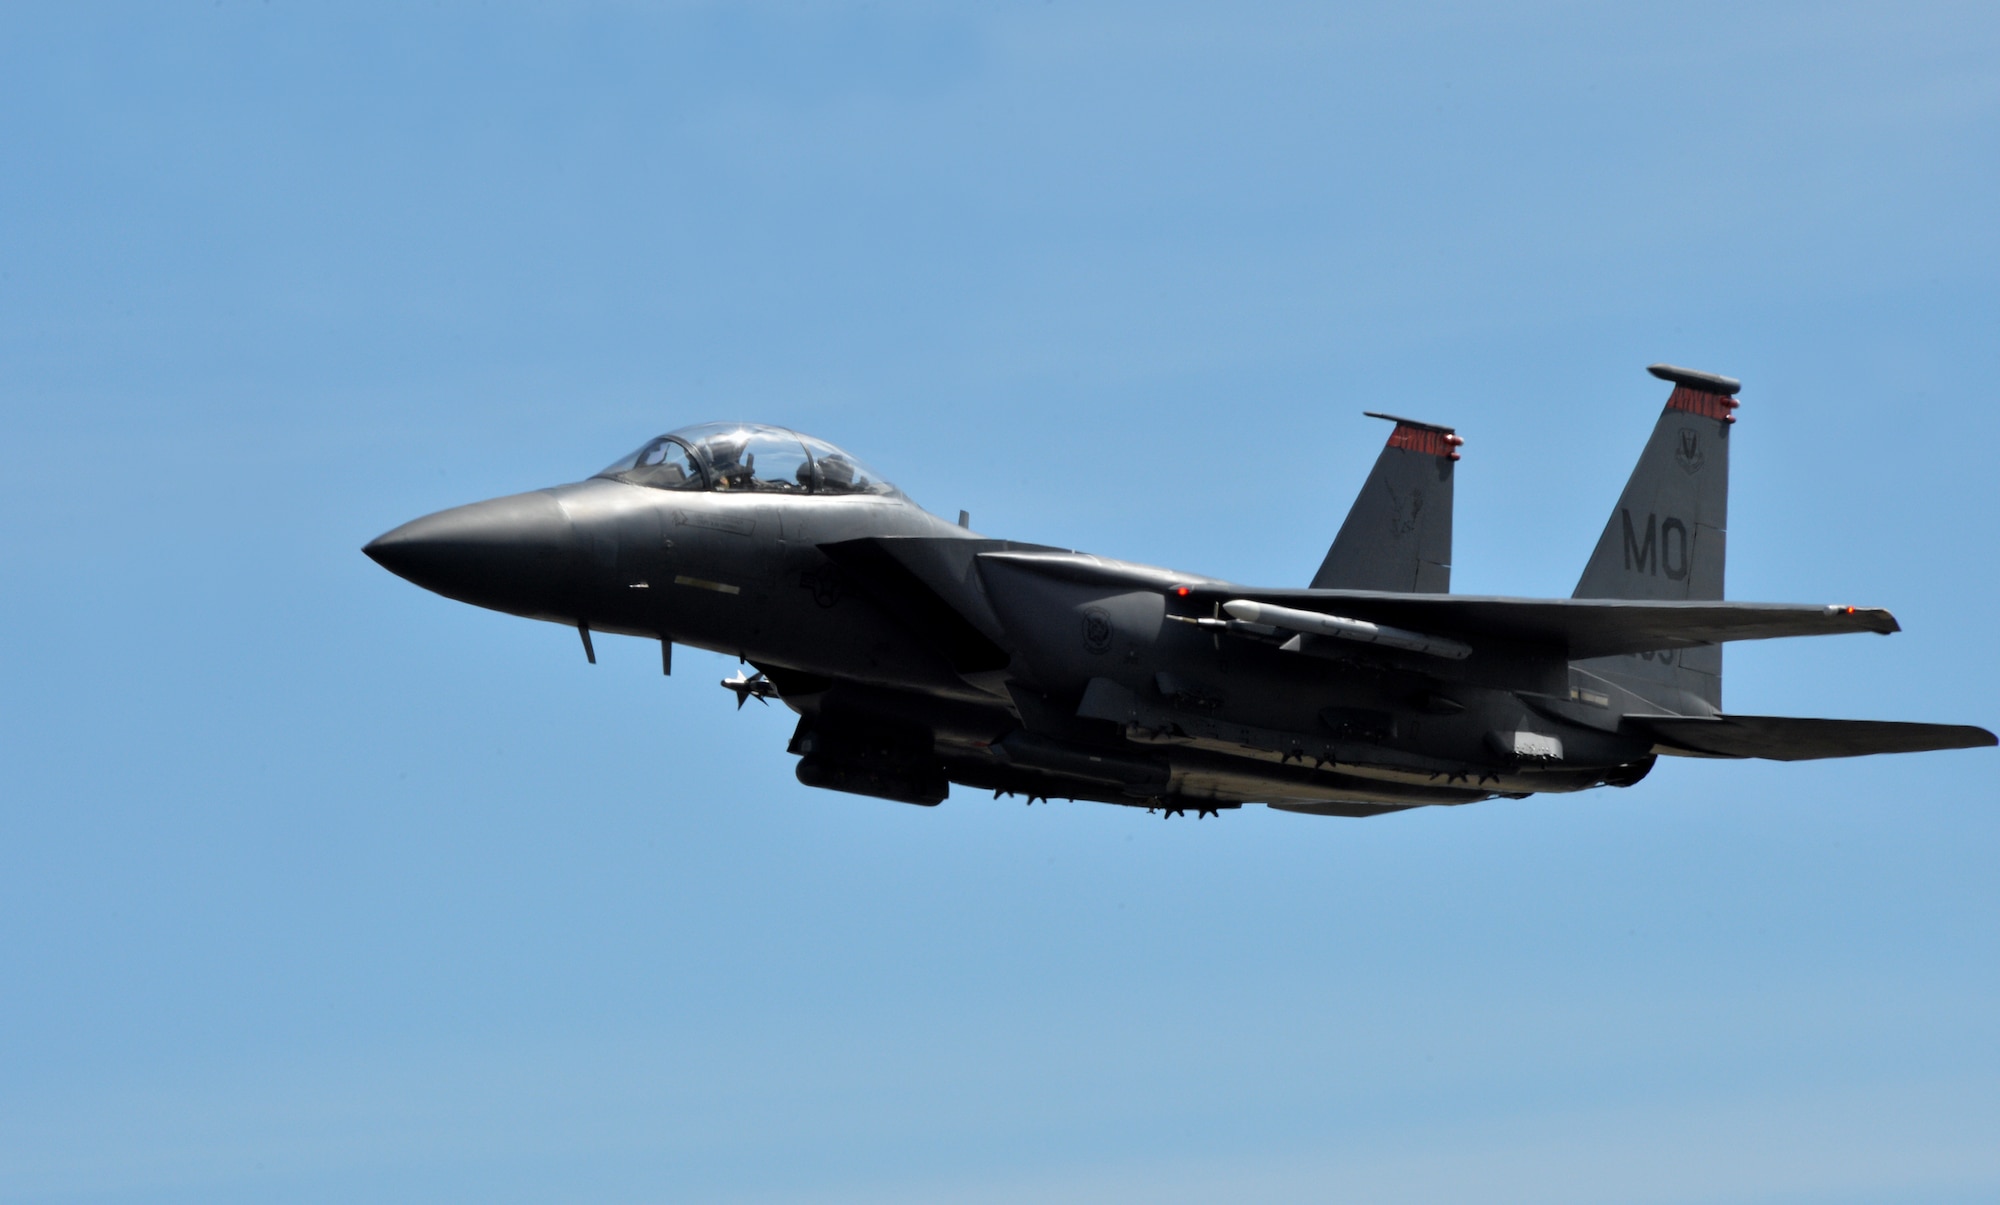 A F-15E Strike Eagle from the 391st Fighter Squadron takes off during a mission July 16, 2014, at Joint Base Pearl Harbor-Hickam, Hawaii. The 391st FS is currently on a two-month deployment here from Mountain Home Air Force Base, Idaho. While here, the squadron’s F-15Es have participated in Rim of the Pacific 2014 exercise missions. RIMPAC is a U.S. Pacific Command-hosted biennial multinational maritime exercise designed to foster and sustain international cooperation on the security of the world’s oceans. (U.S. Air Force photo/Staff Sgt. Alexander Martinez)